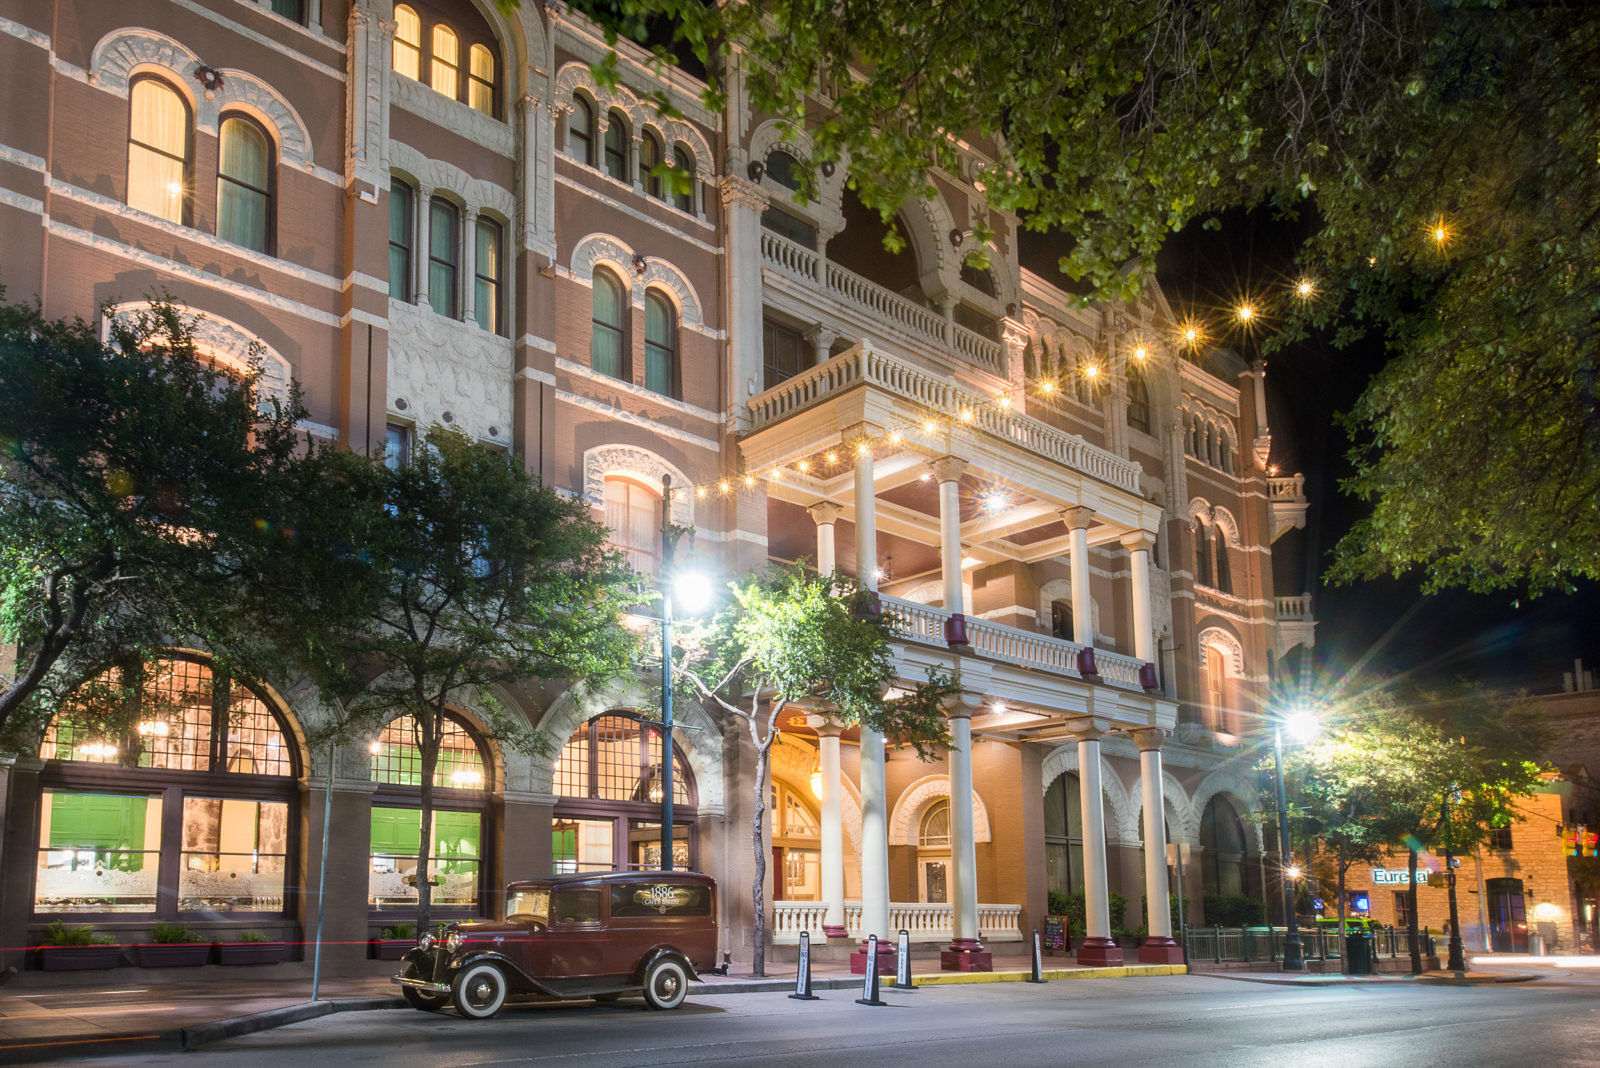 Must-See Historic Texas Buildings | Texas Heritage for Living